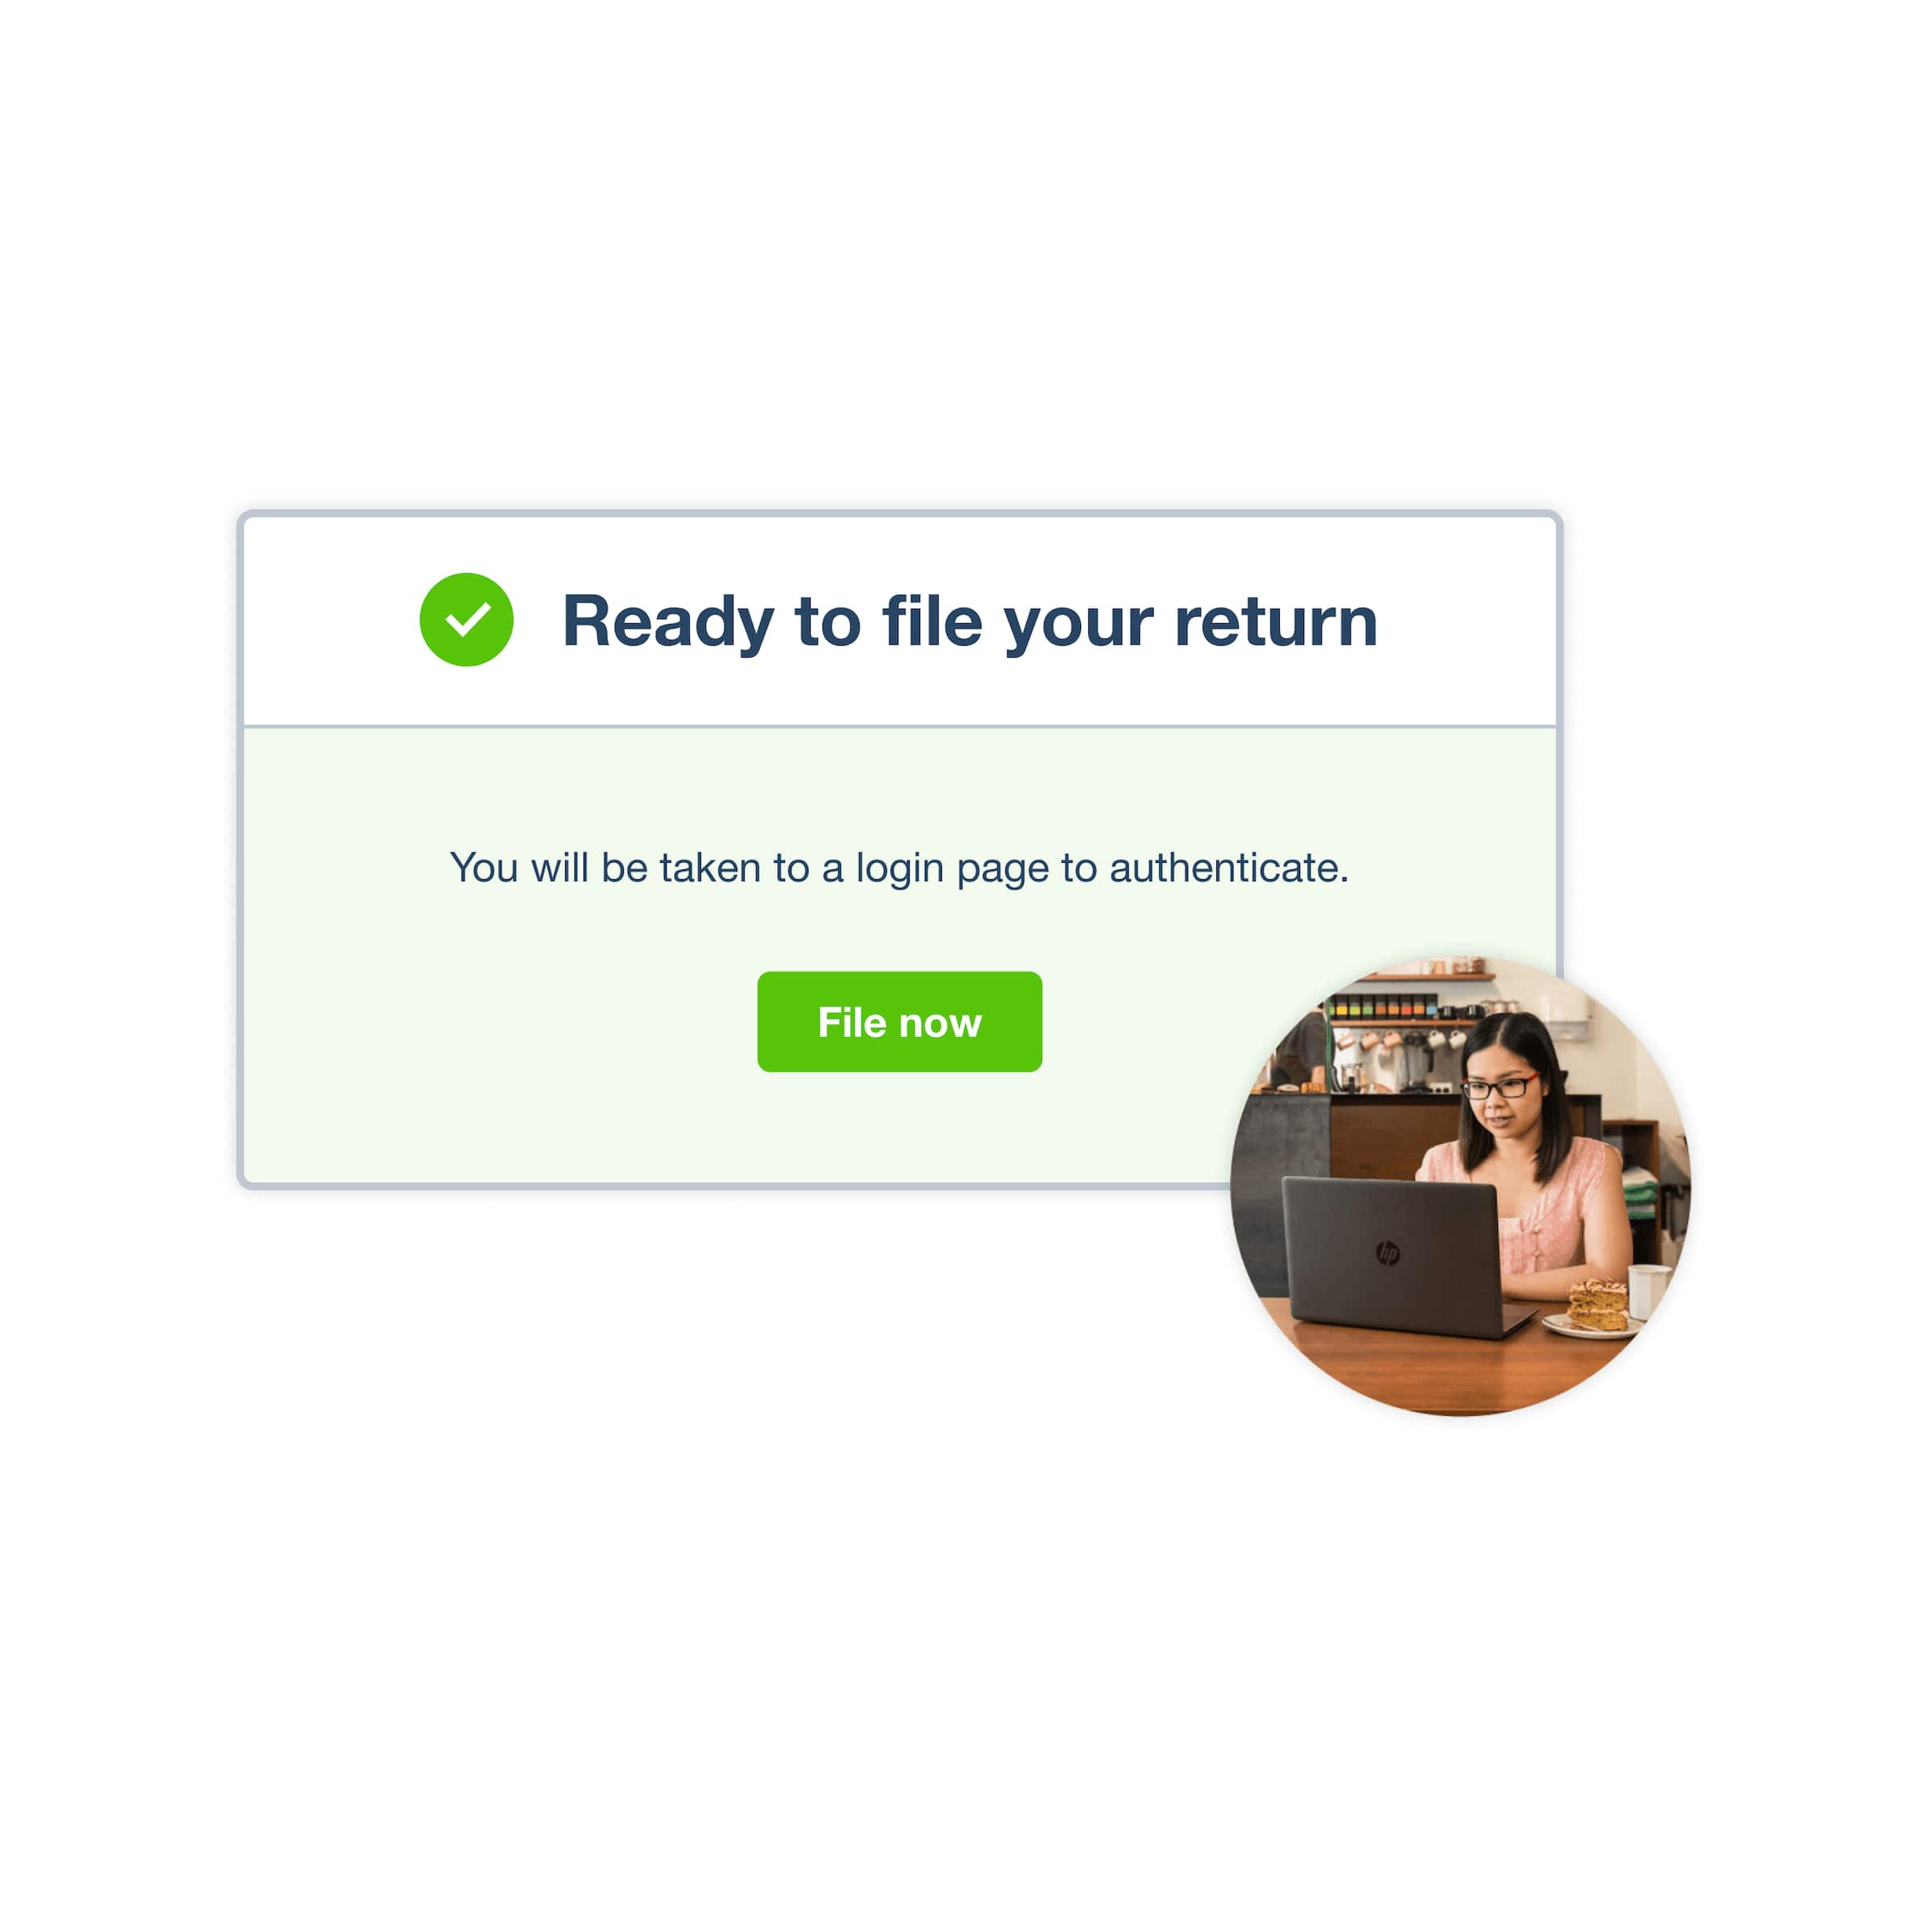  Xero’s accounting software for retailers shows a ‘File now’ button for submitting a GST return.